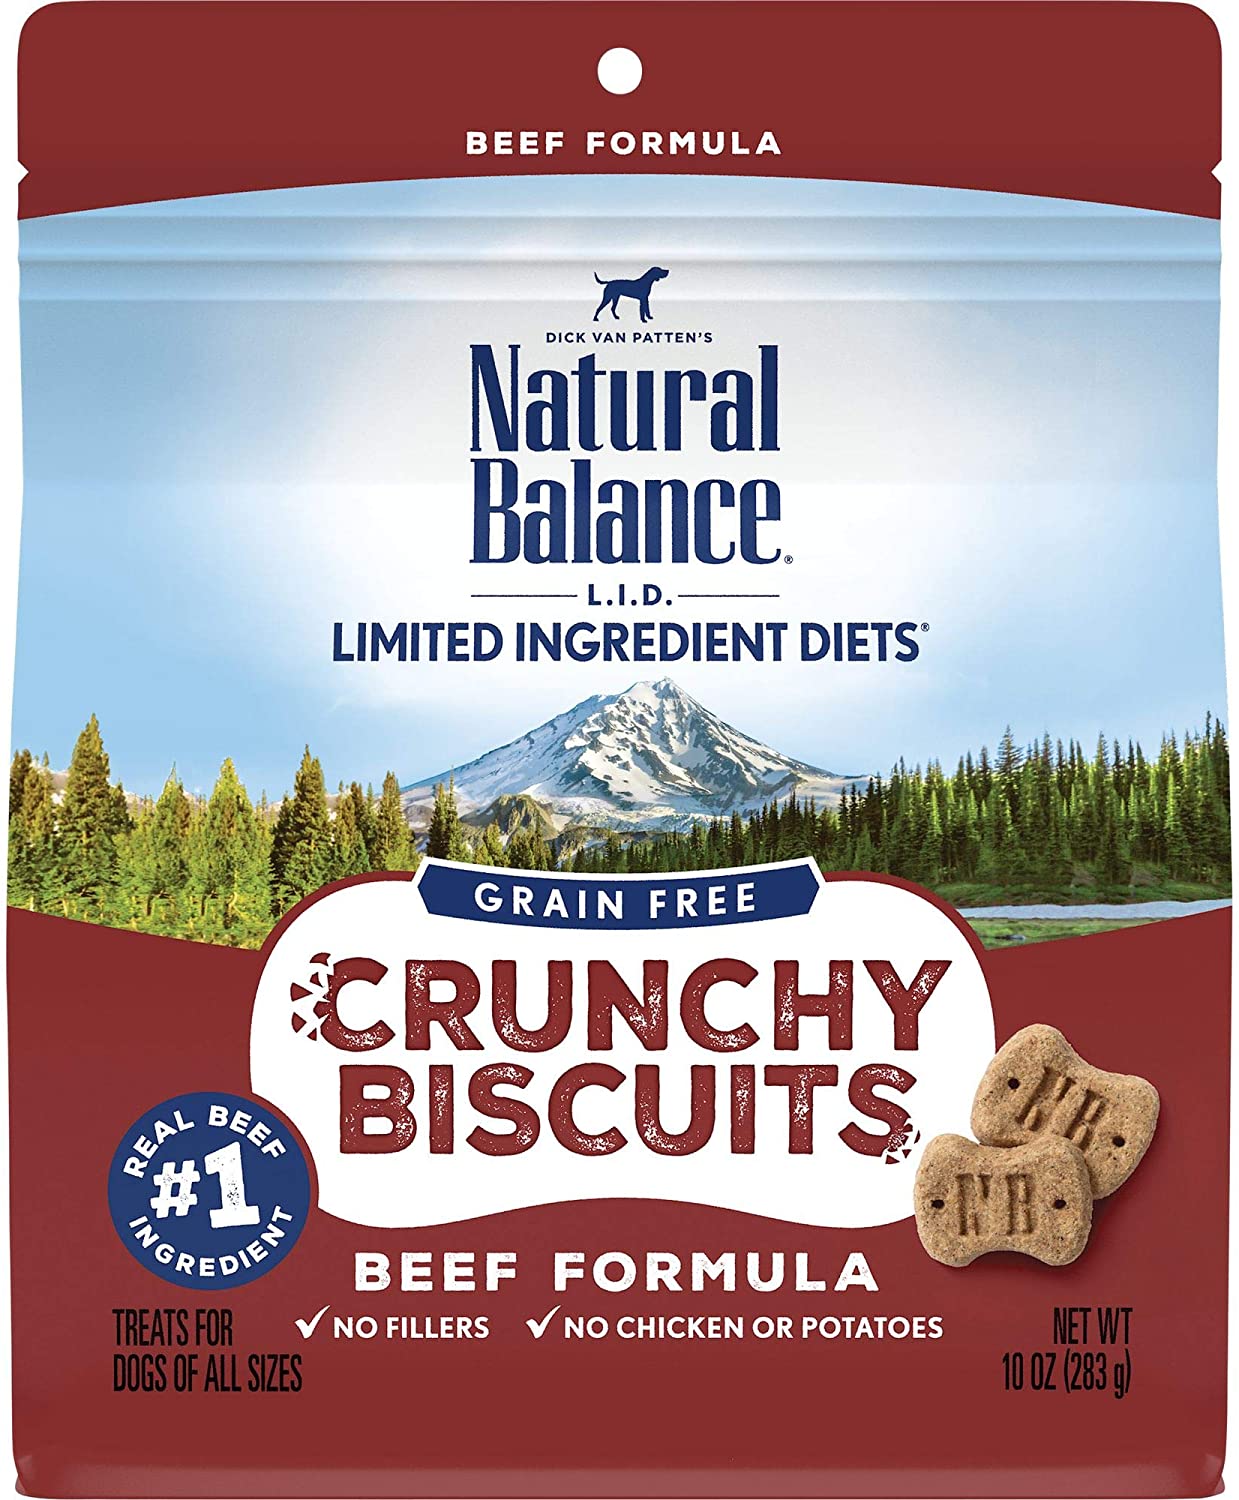 10-Oz Natural Balance L.I.D. Crunchy Biscuits Beef Formula Dog Treats $2.50 + Free Shipping w/ Amazon Prime or Orders $25+